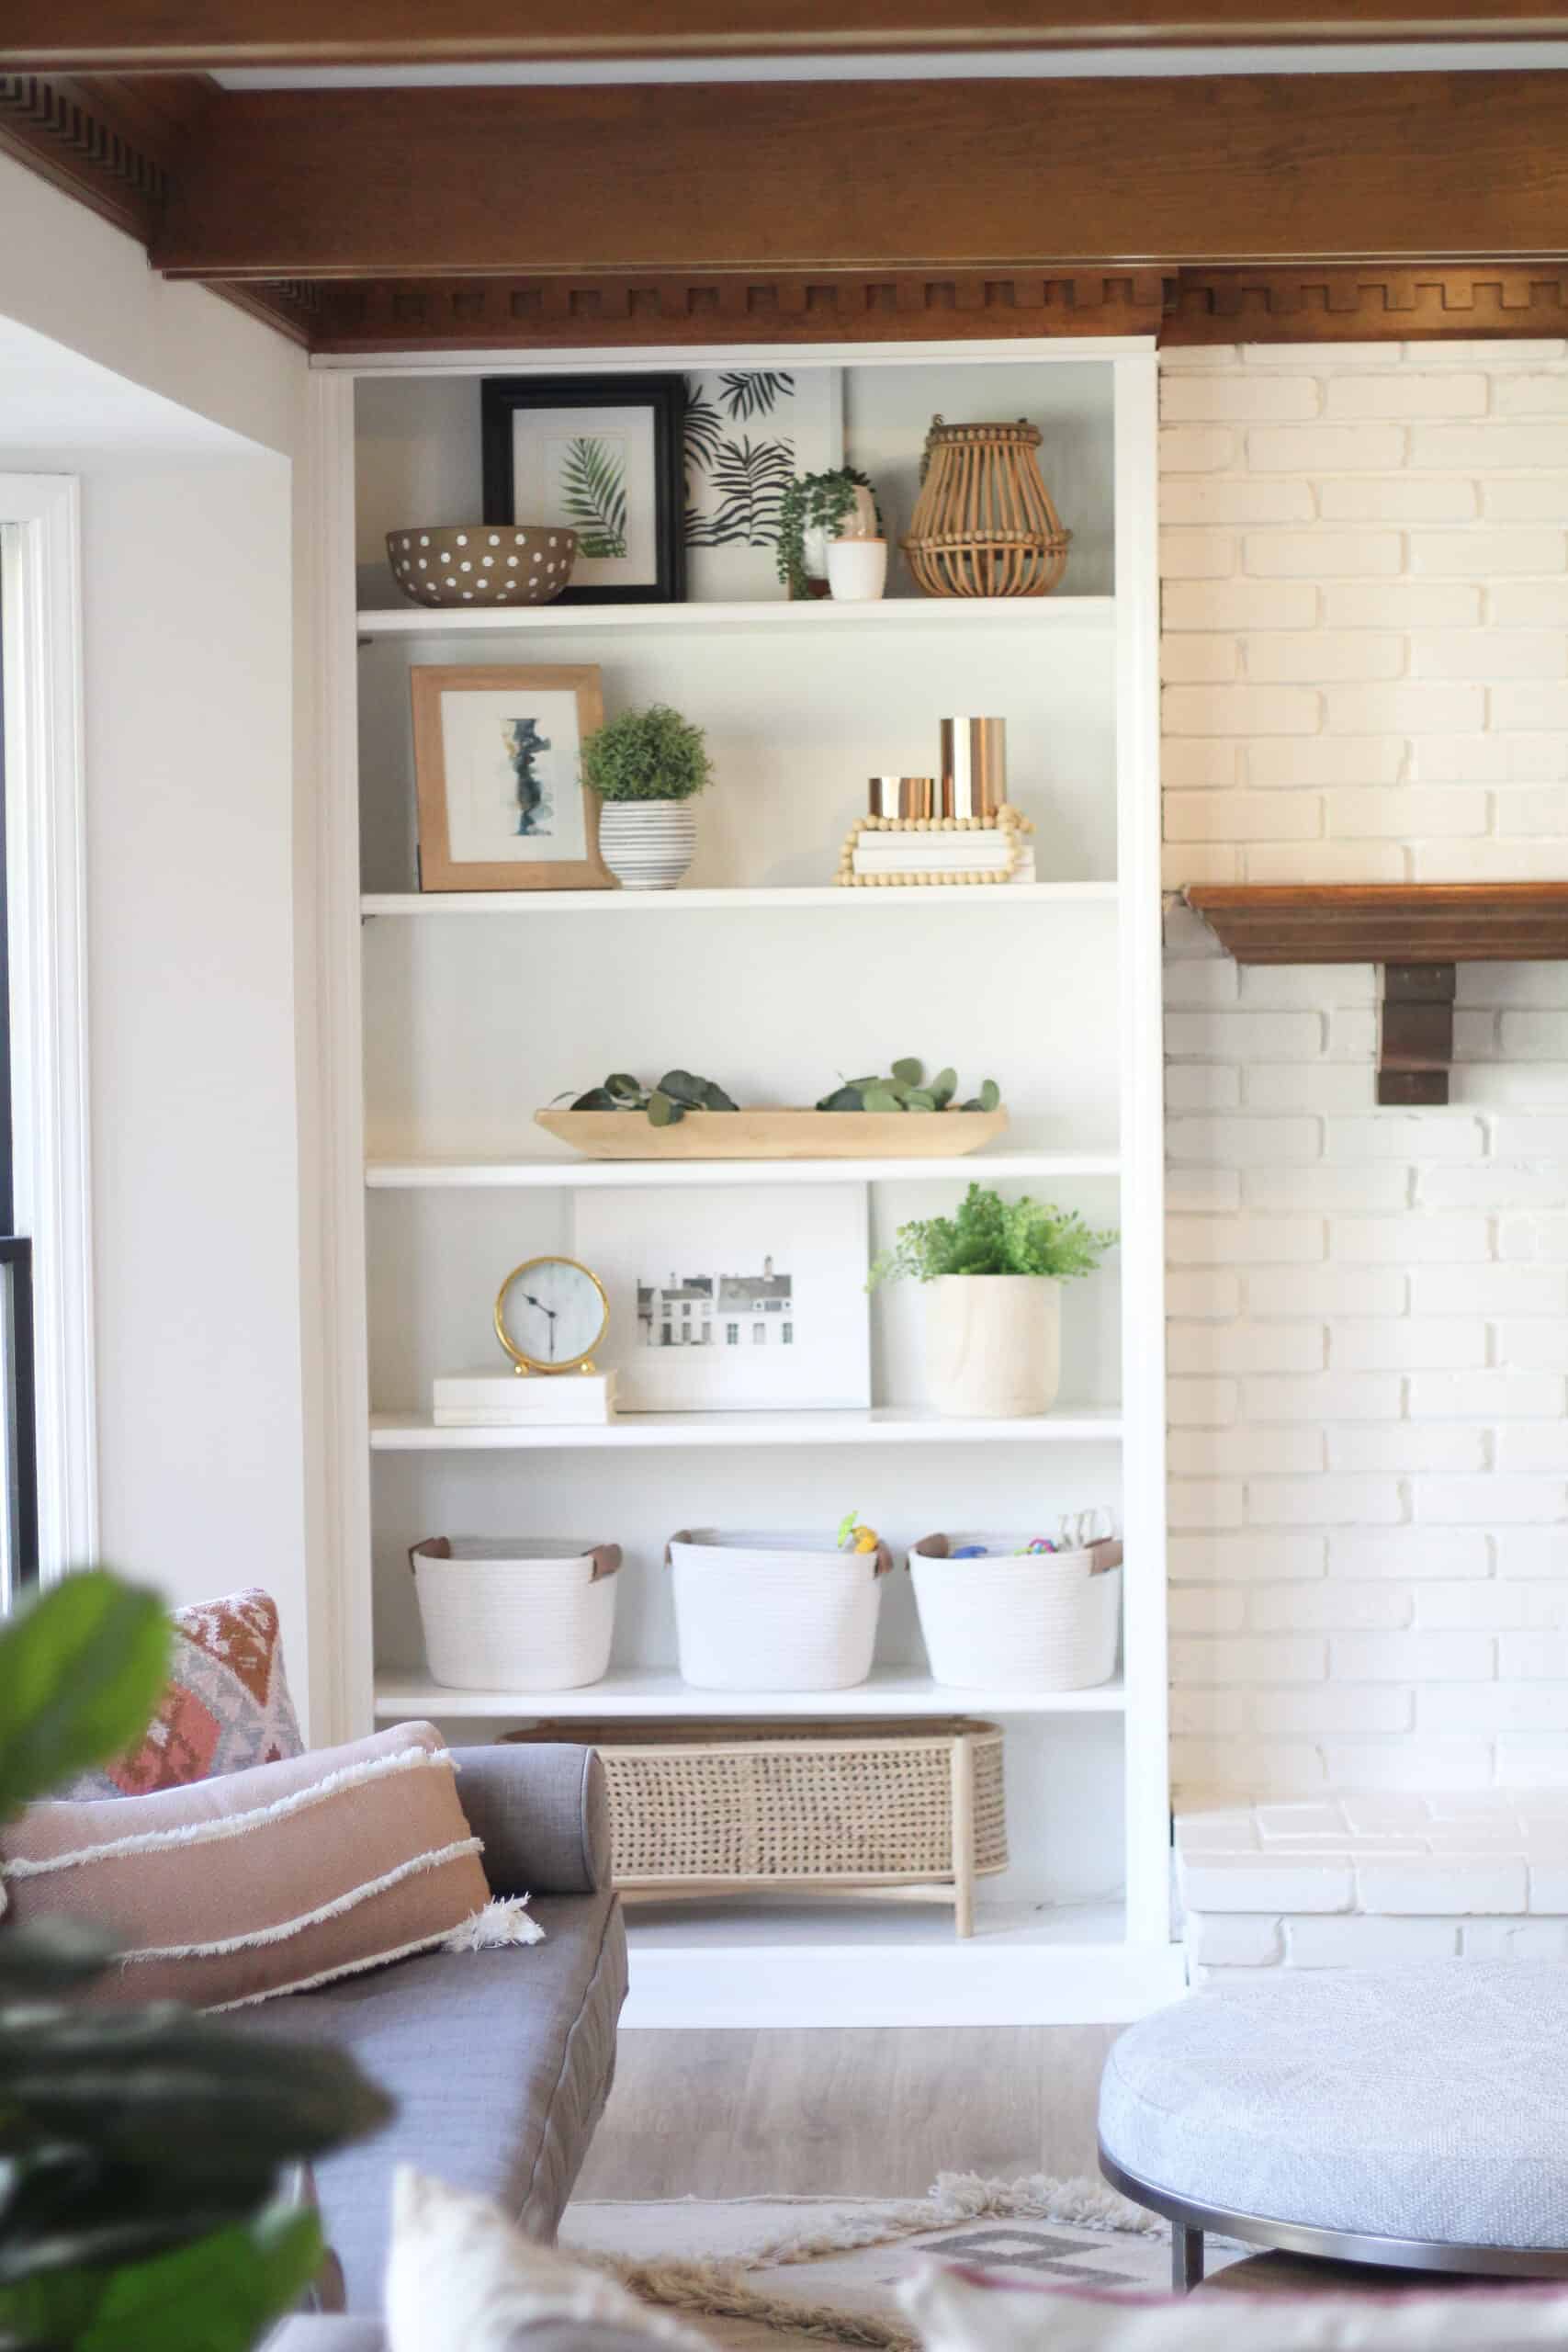 How to Decorate Shelving - arinsolangeathome